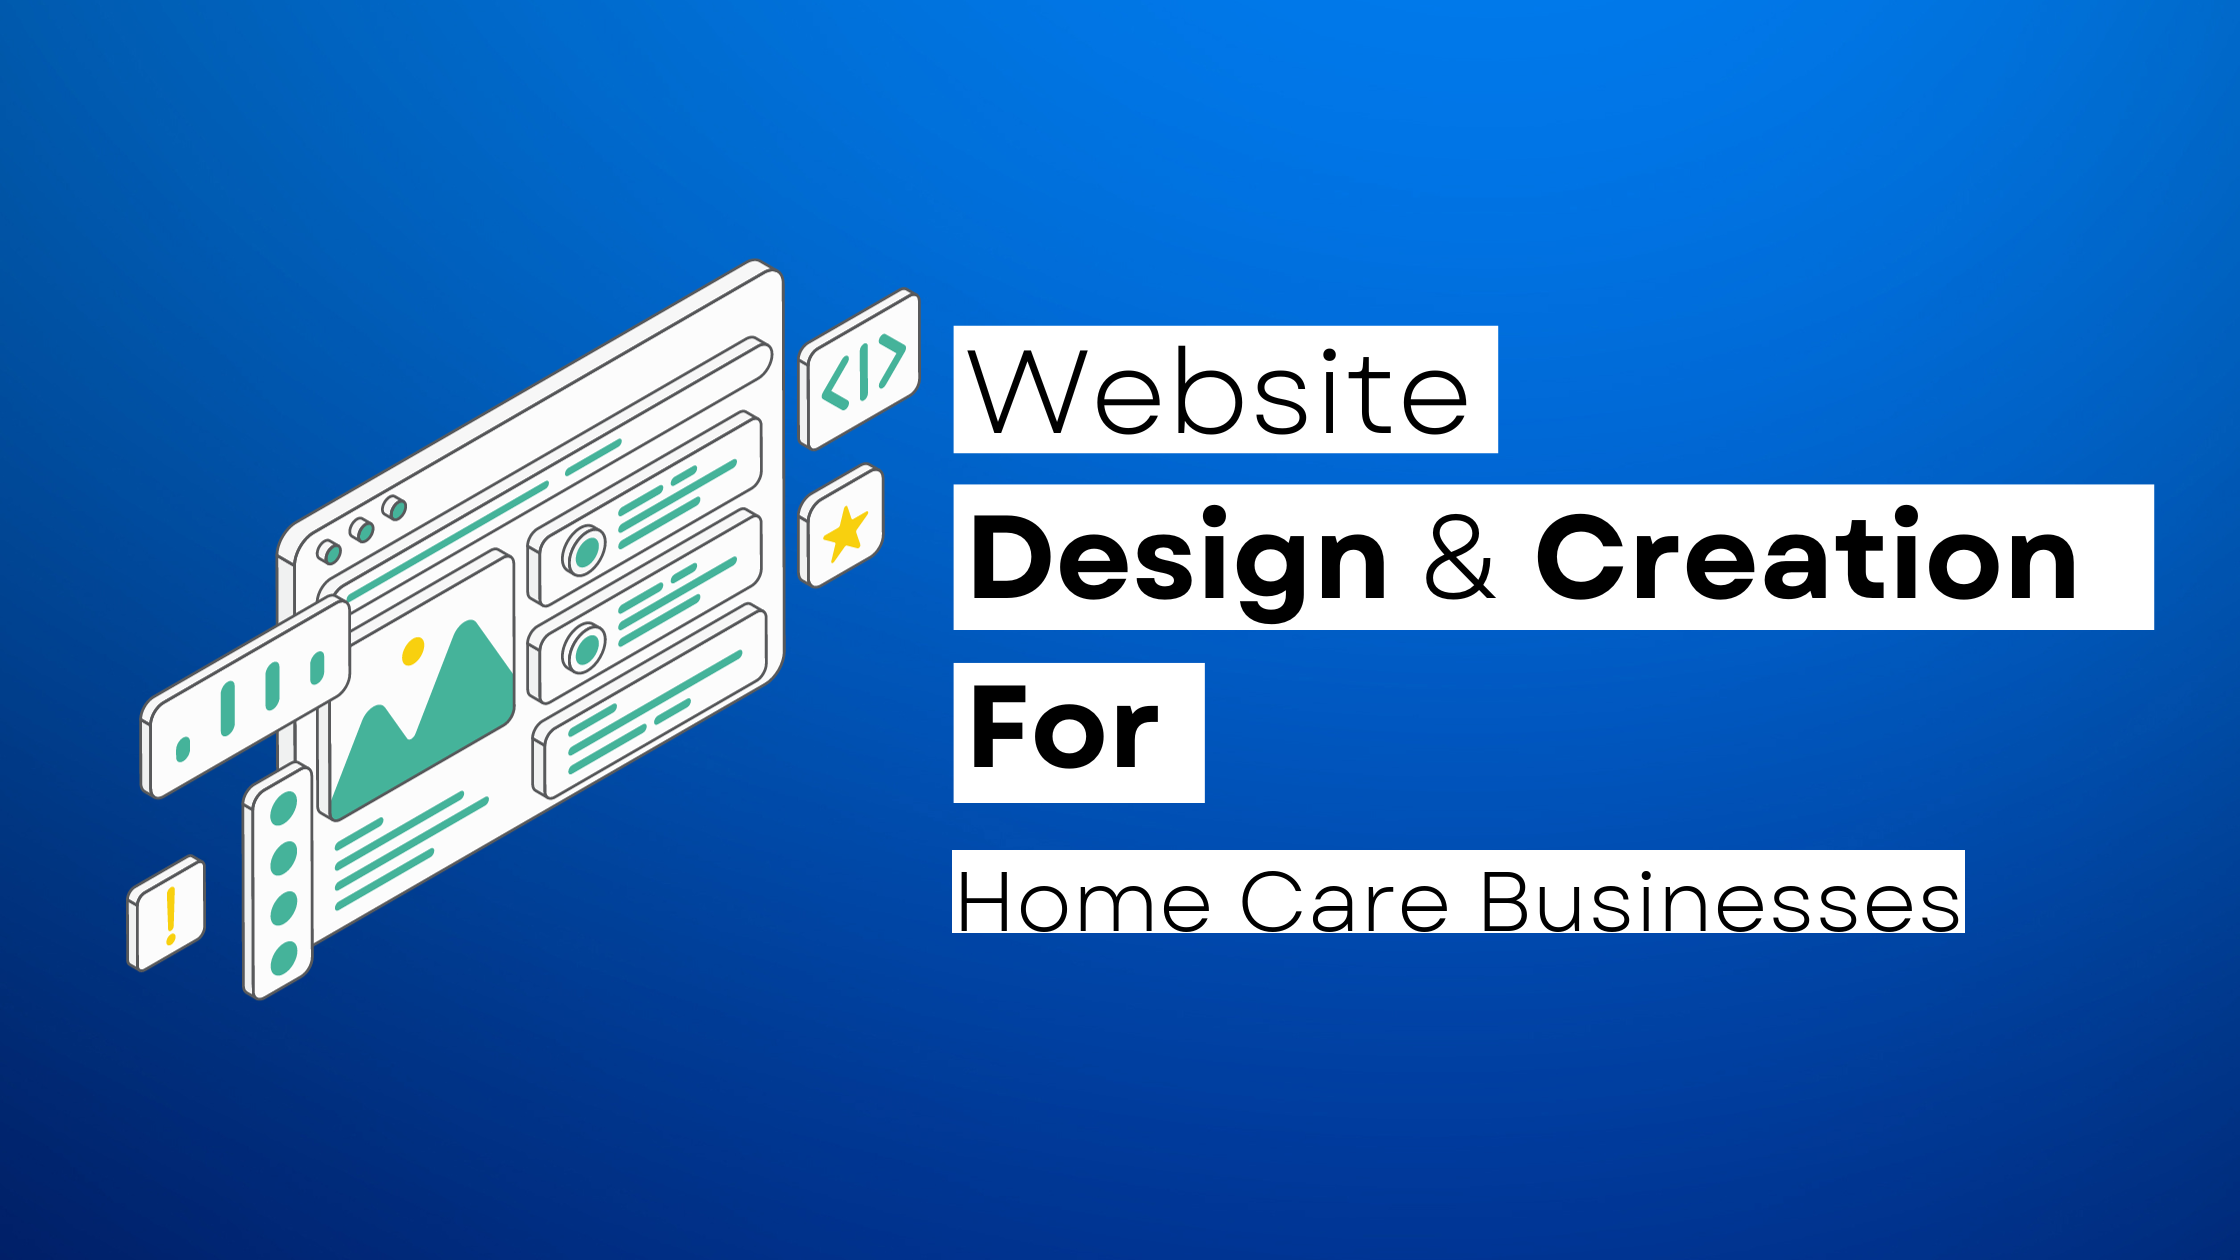 How to start a Home Care website